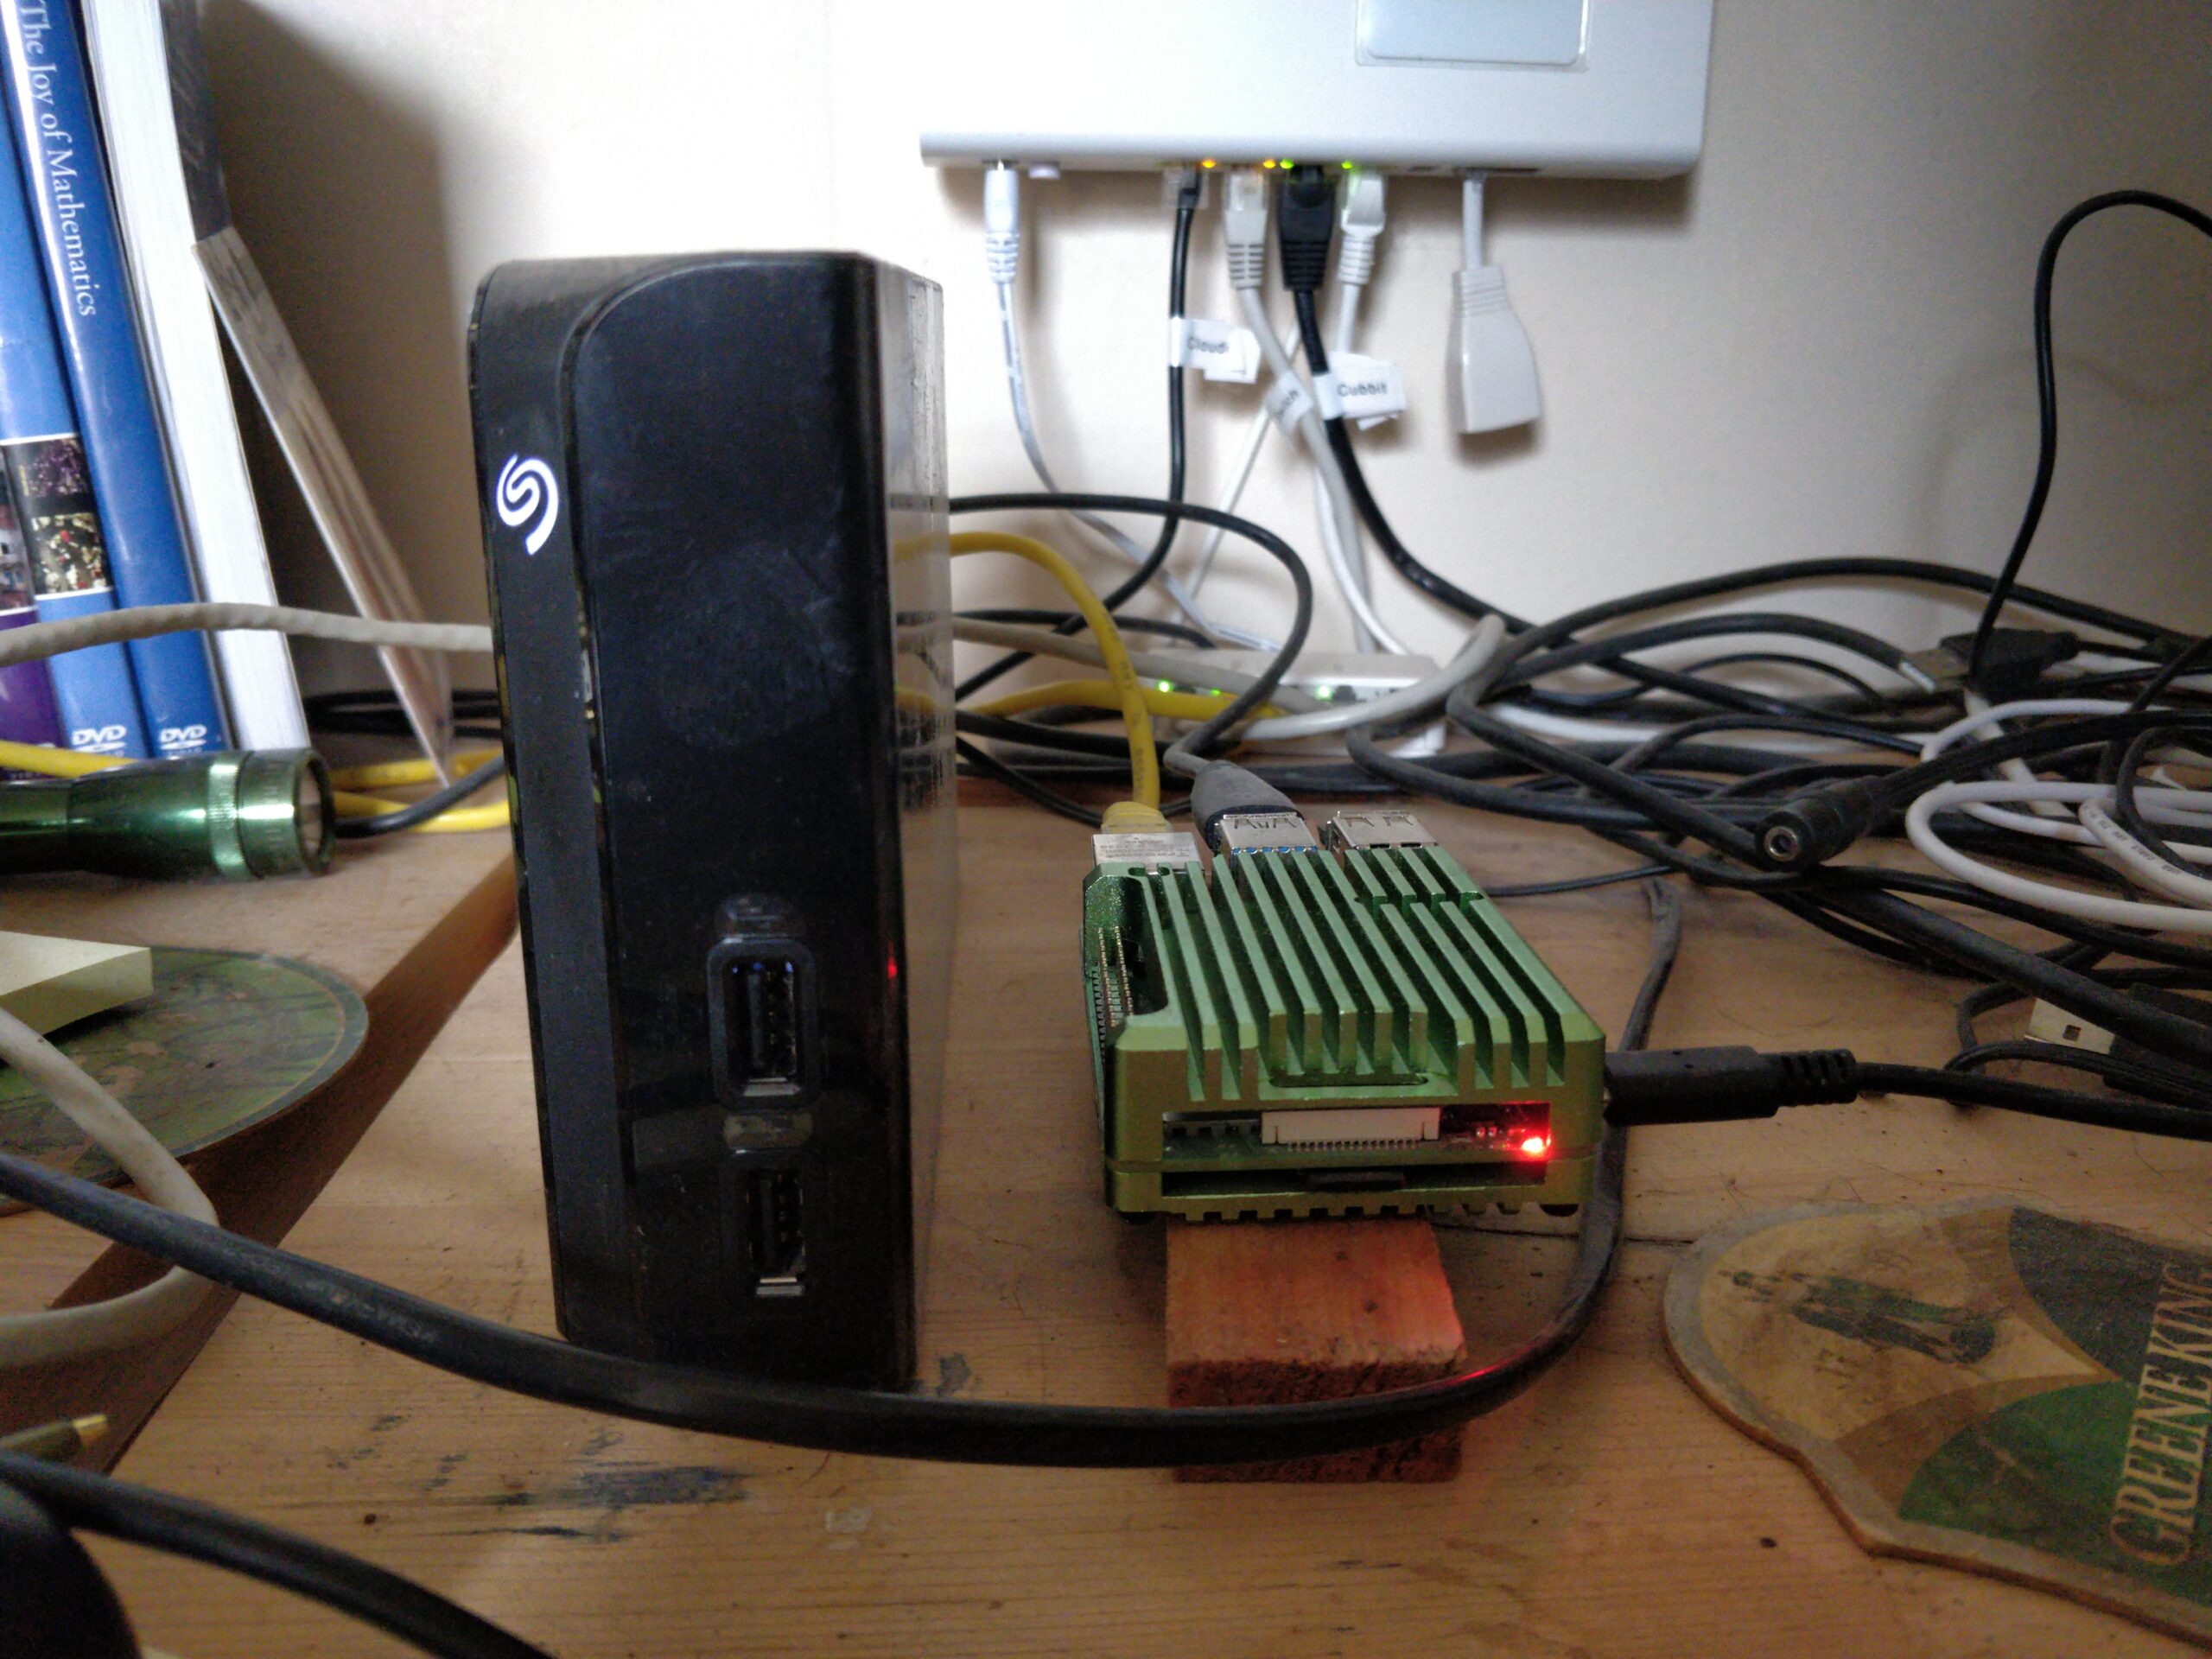 An external hard drive case looms over the Raspberry Pi case to which it is attached. A confusion of wires sits behind them.